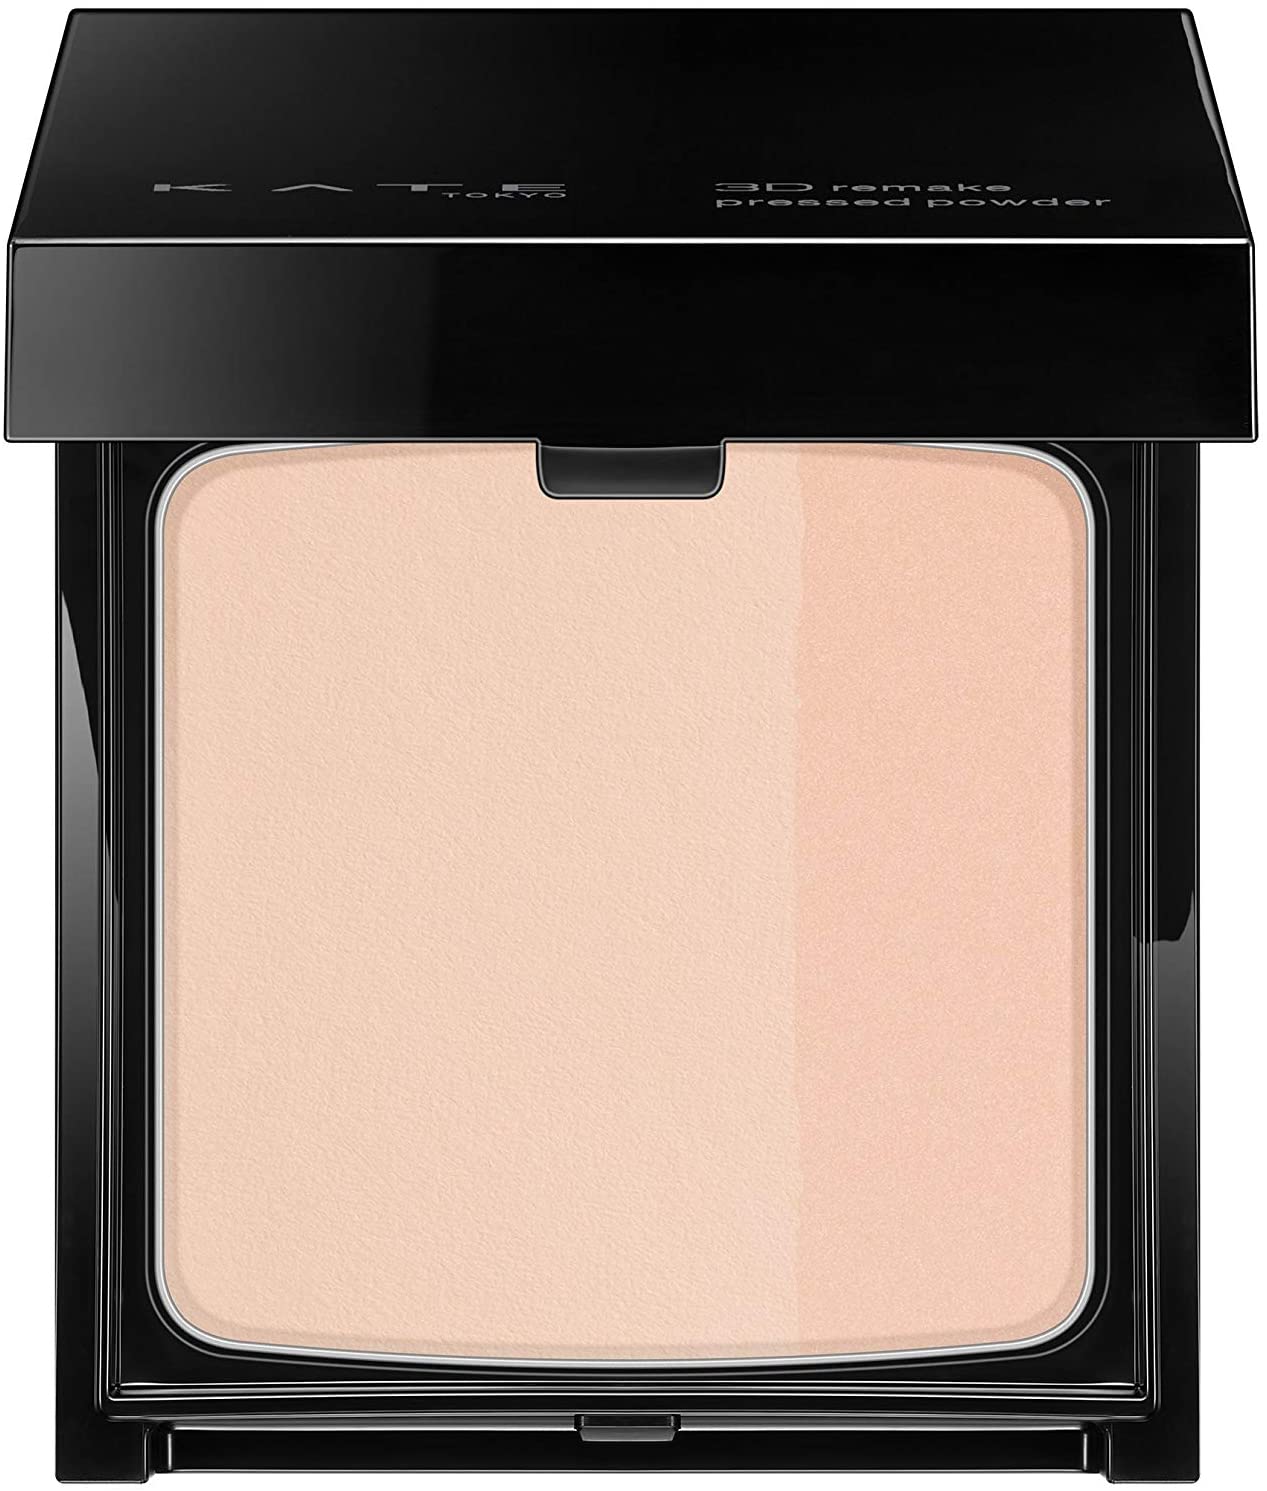 Kanebo Kate 3D Remake Pressed Powder - Harajuku Culture Japan - Japanease Products Store Beauty and Stationery